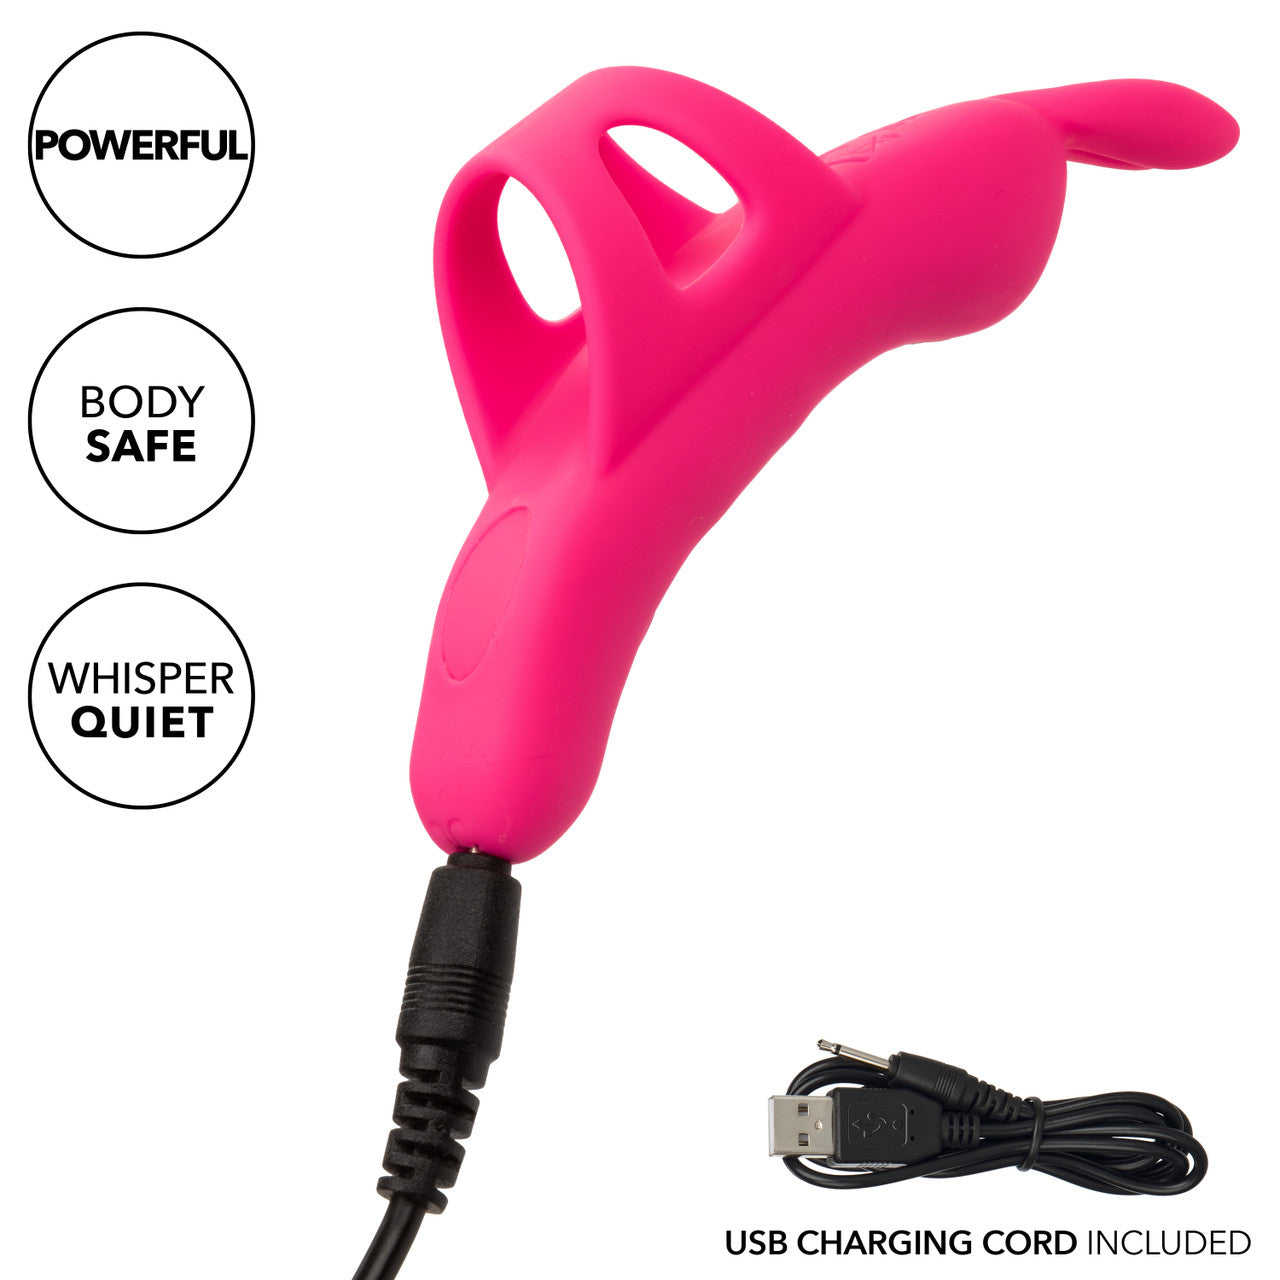 Neon Vibes The Flirty Vibe - Thorn & Feather Sex Toy Canada